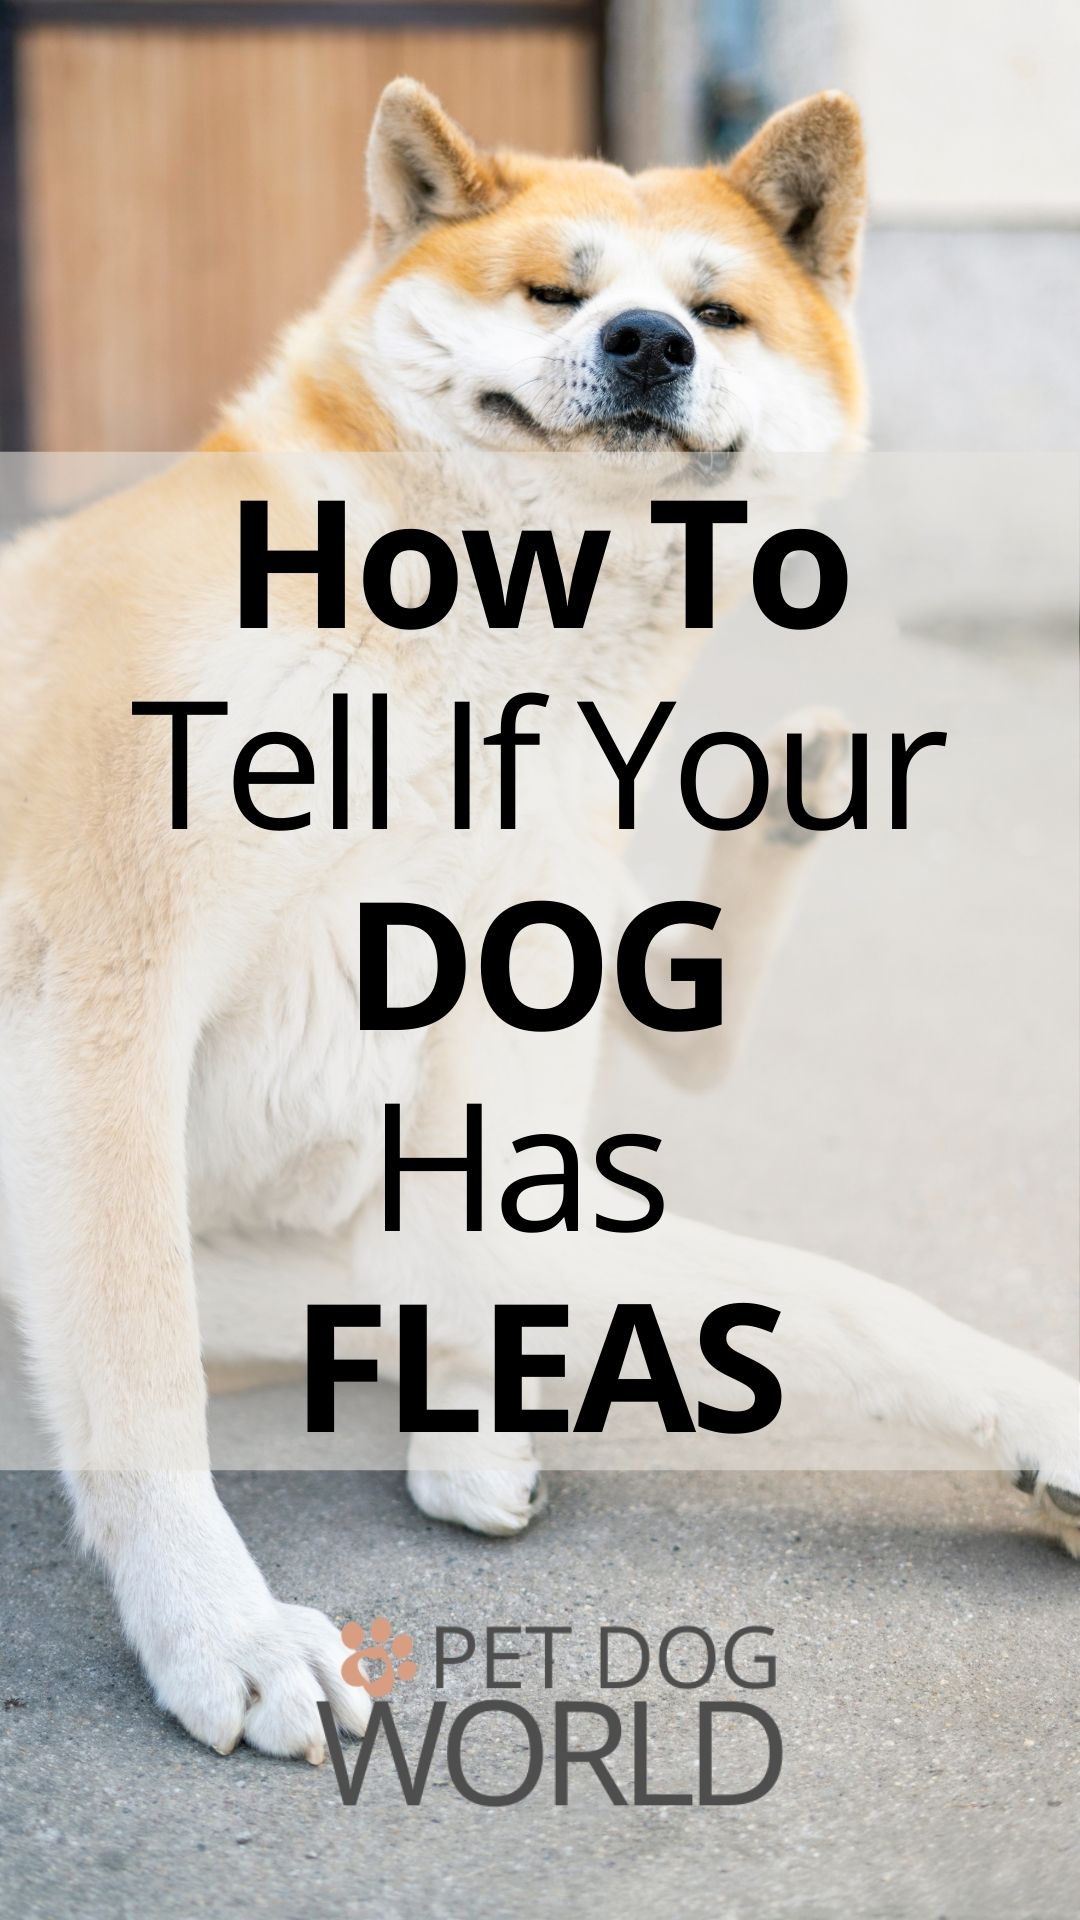 Fleas are prevalent and annoying parasites. They bite, and they spread quickly. Here's how to spot them on your dog.